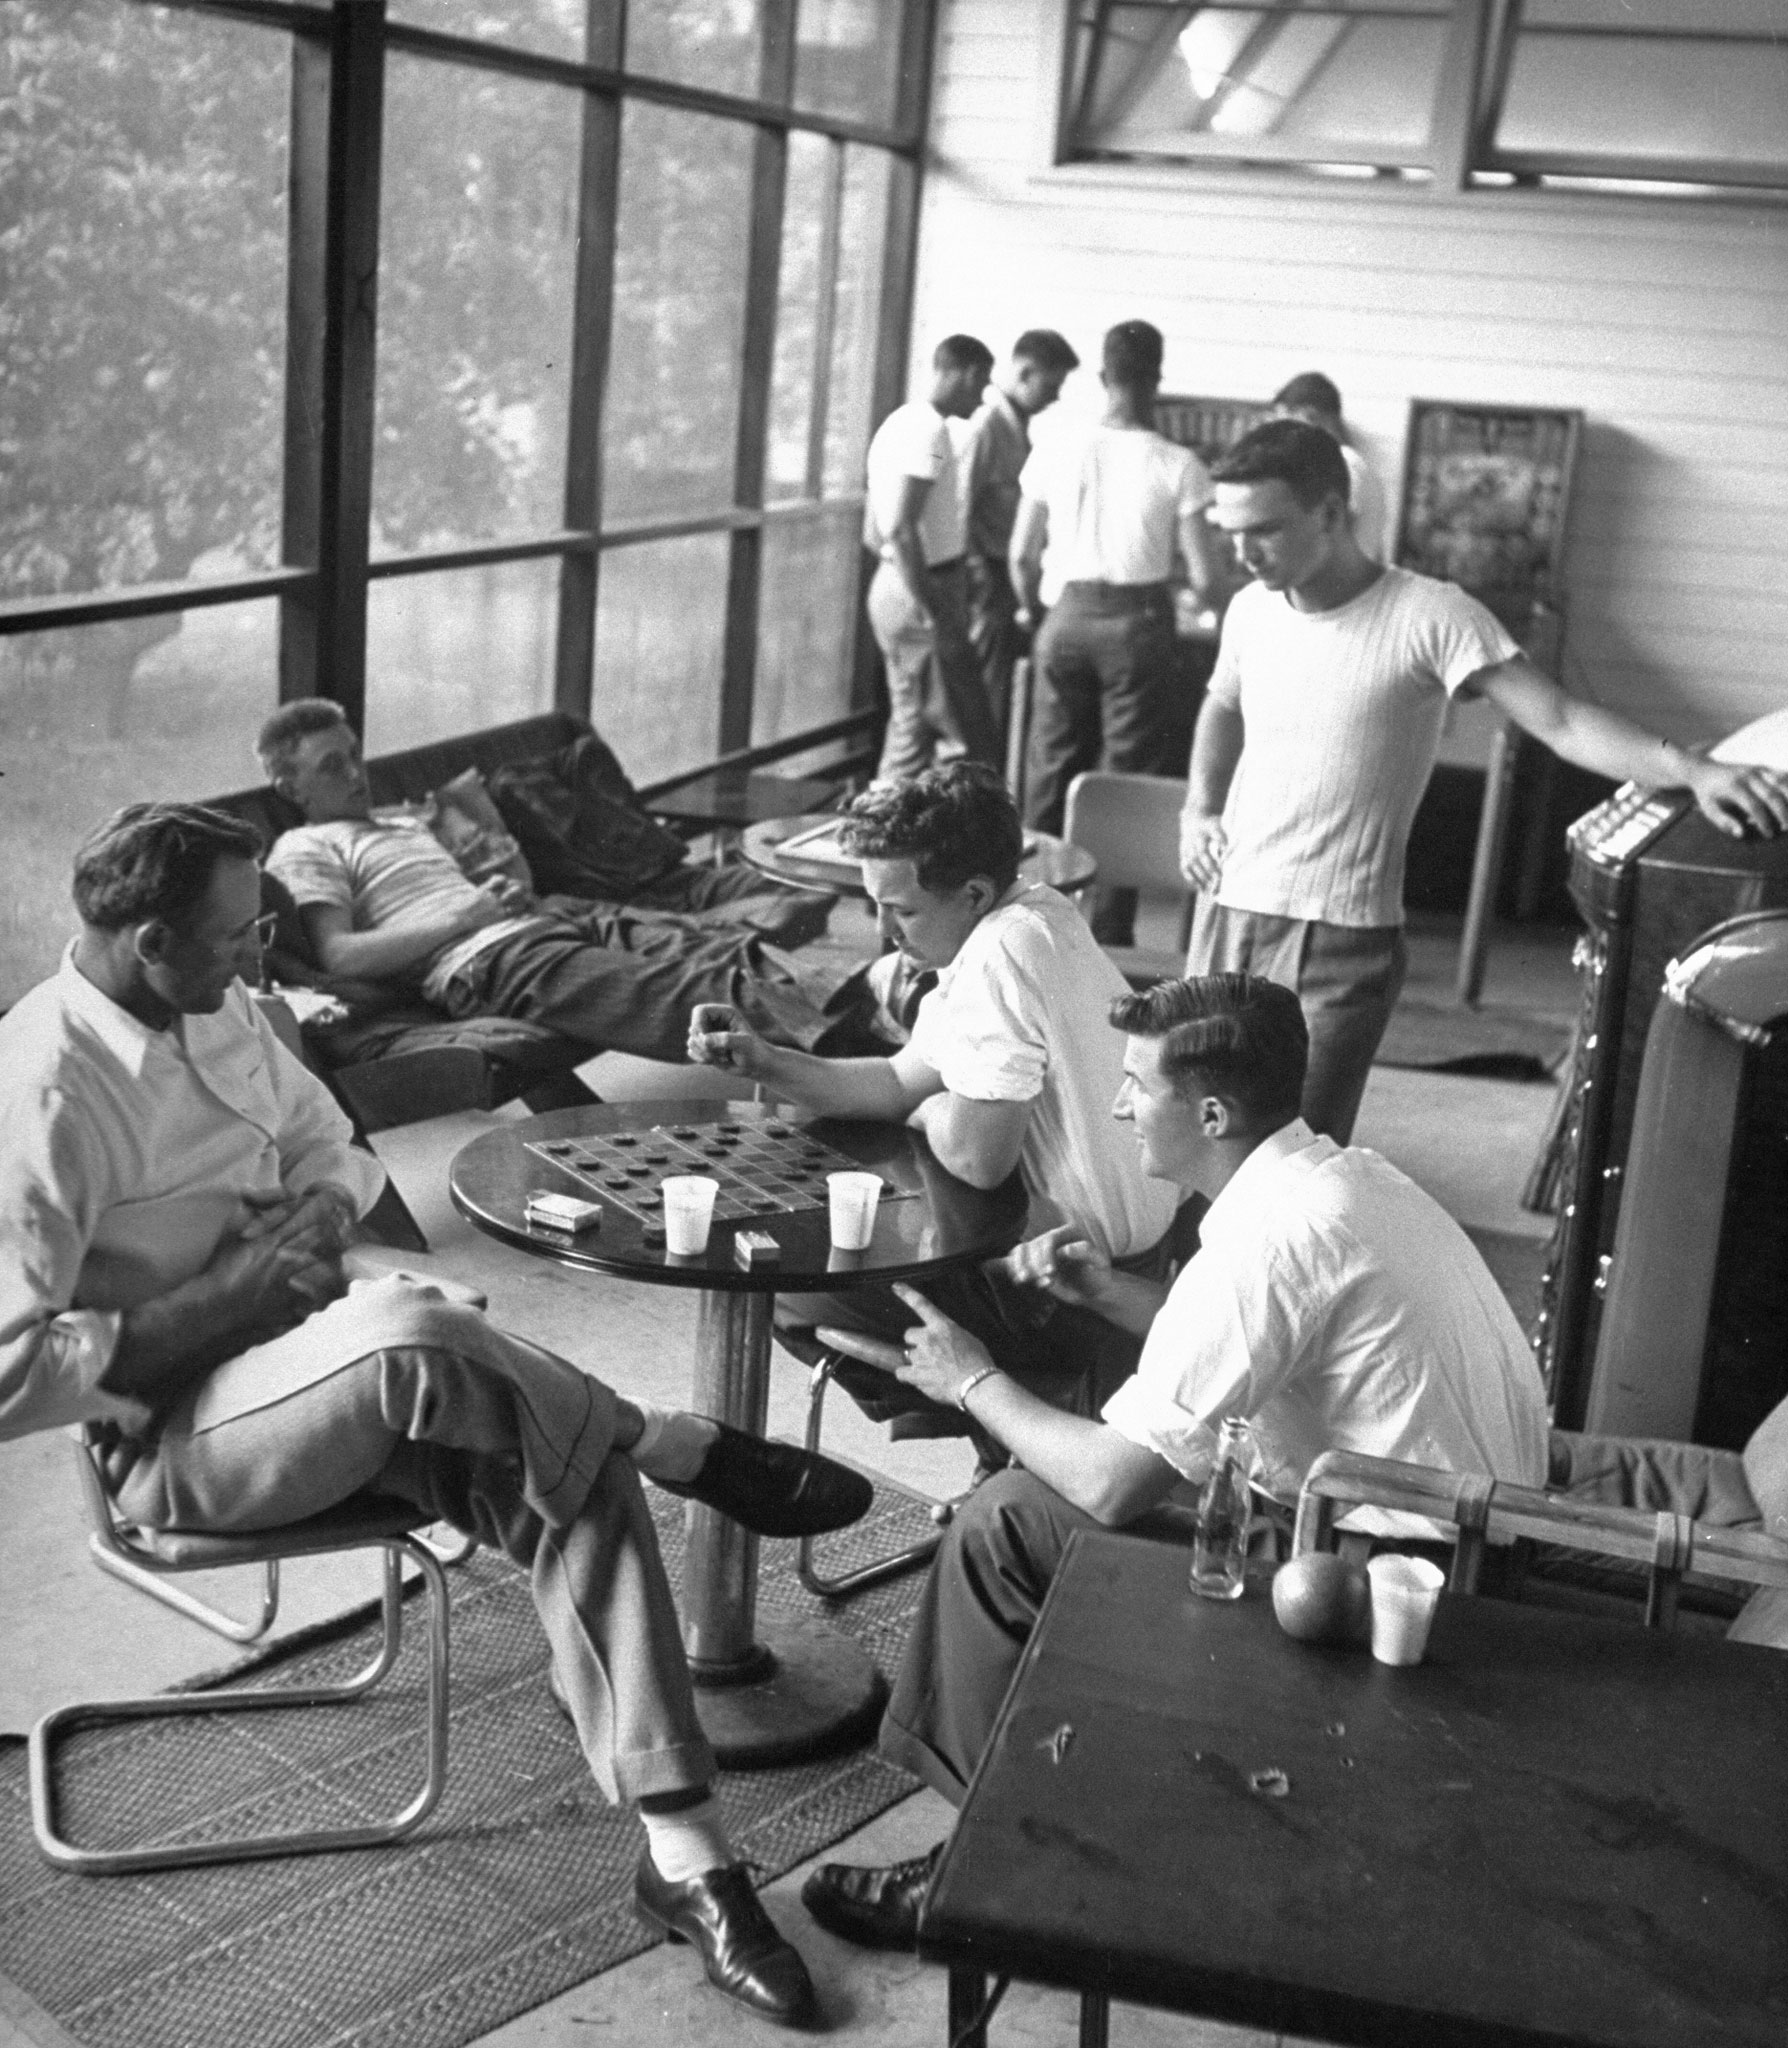 Players relax during spring training at Dodgertown, Vero Beach, Fla., 1948.